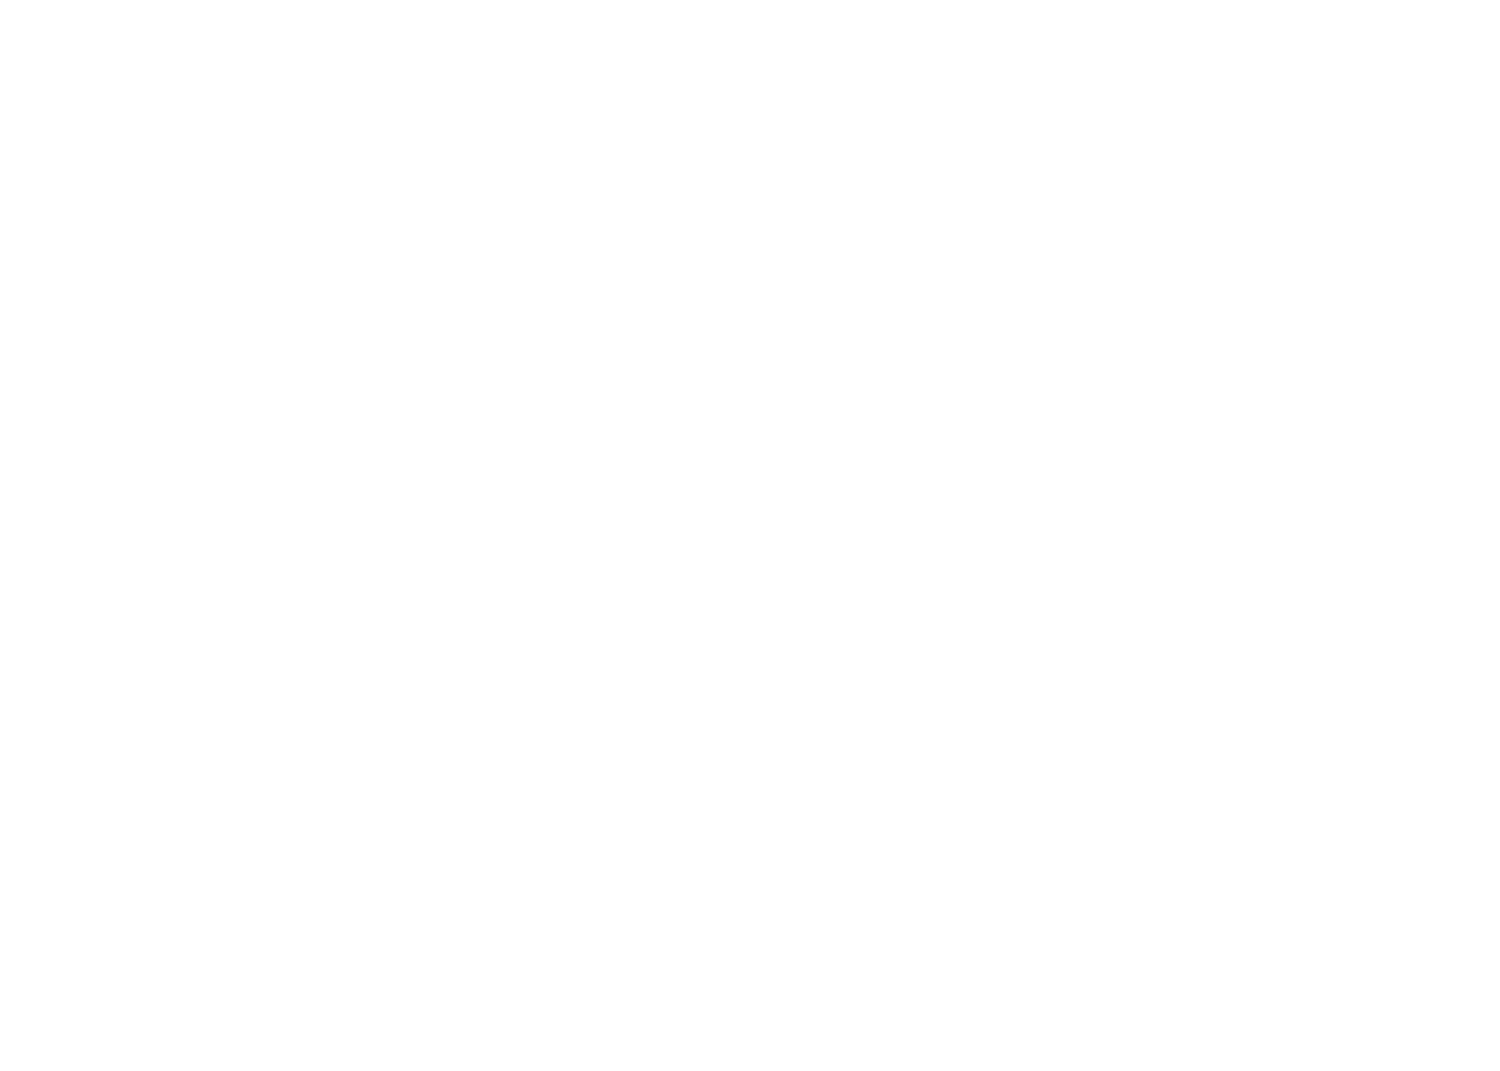 We Are Sherpa